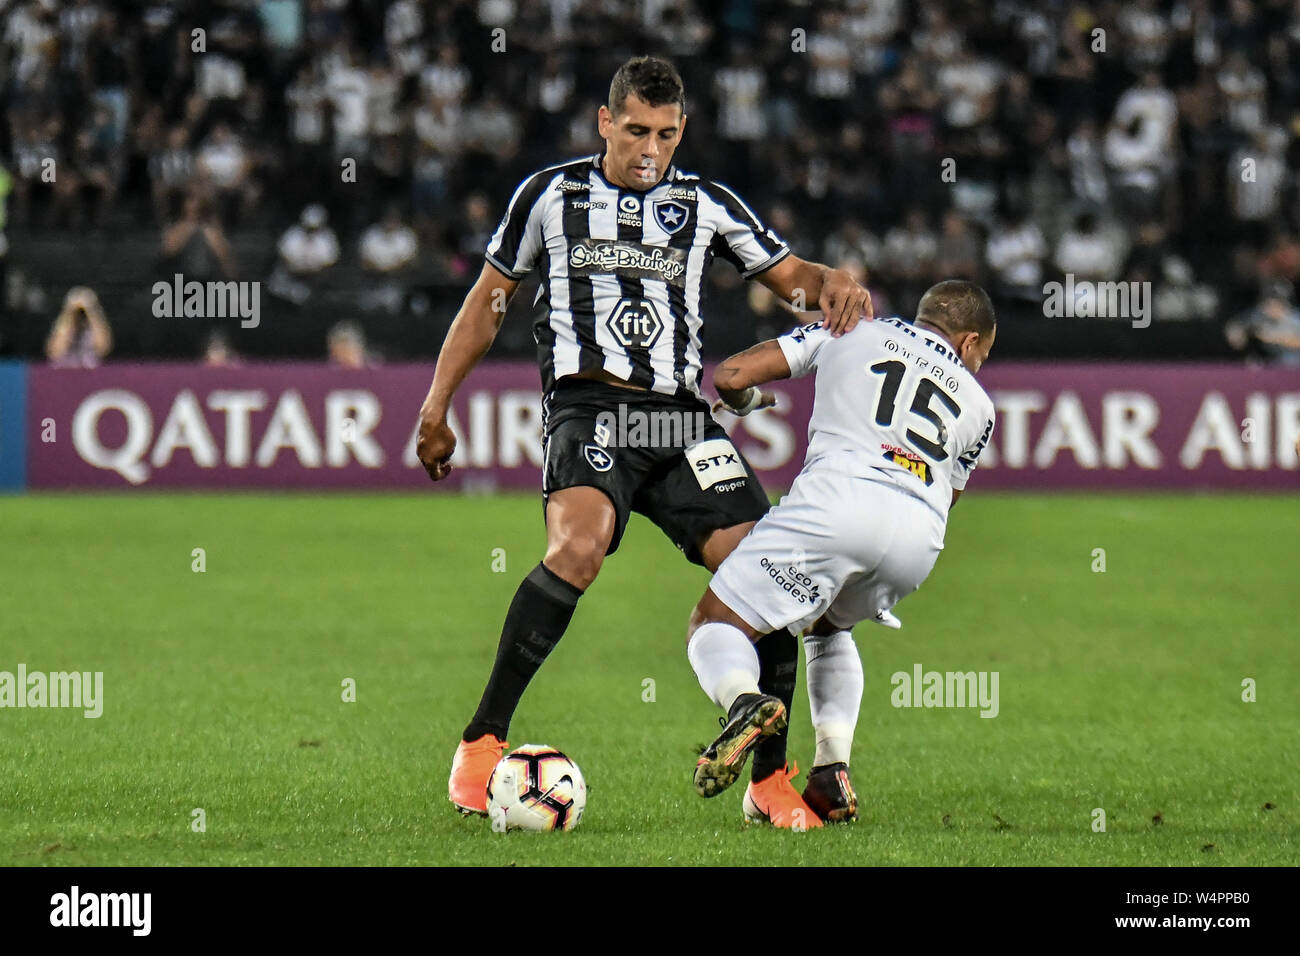 Rio De Janeiro, Brazil. 24th July, 2019. Diego Souza plays the ball with Otero during Botafogo vs Atletico MG, a match valid for the Copa Sudamericana, held at the Nilton Santos stadium, located in the city of Rio de Janeiro, on Wednesday (24). Credit: Nayra Halm/FotoArena/Alamy Live News Stock Photo